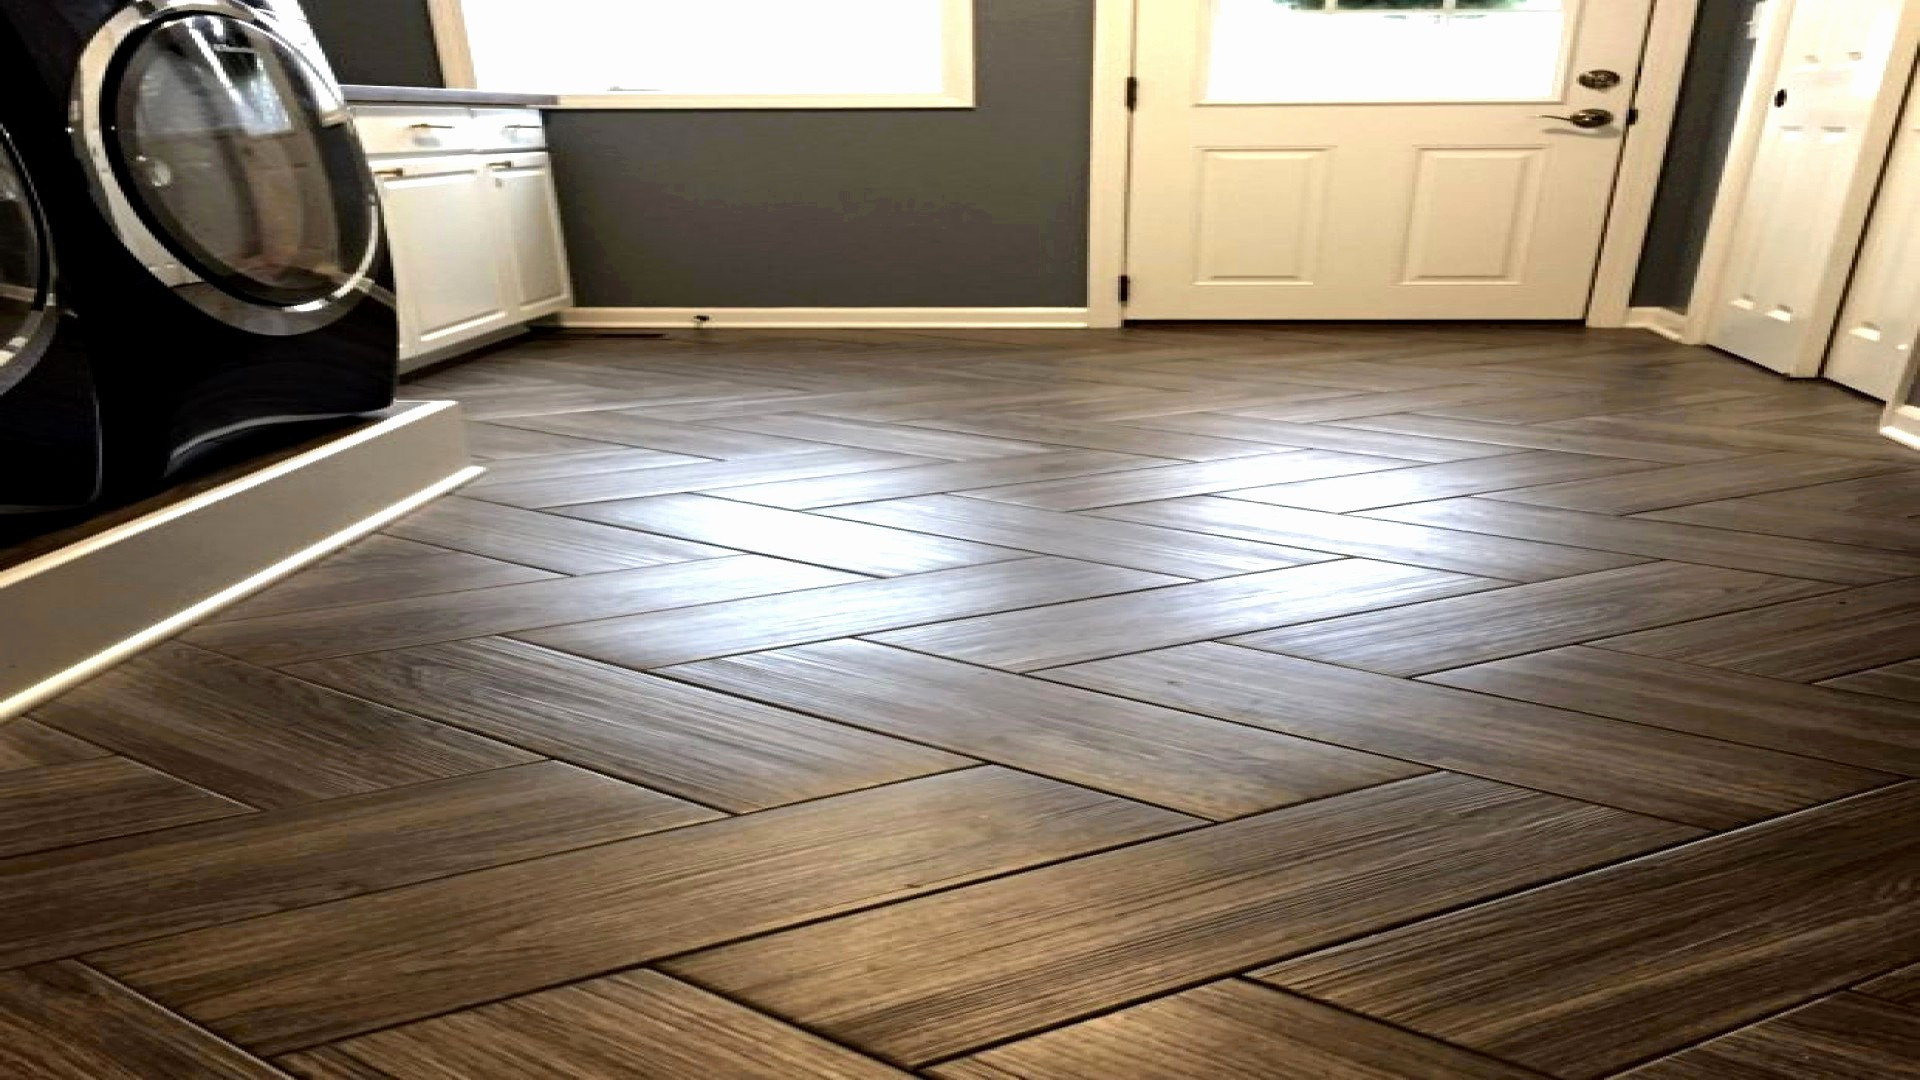 hardwood floor width of 19 awesome hardwood flooring for sale photograph dizpos com pertaining to hardwood flooring for sale best of 52 luxury wood flooring sale 52 s photograph